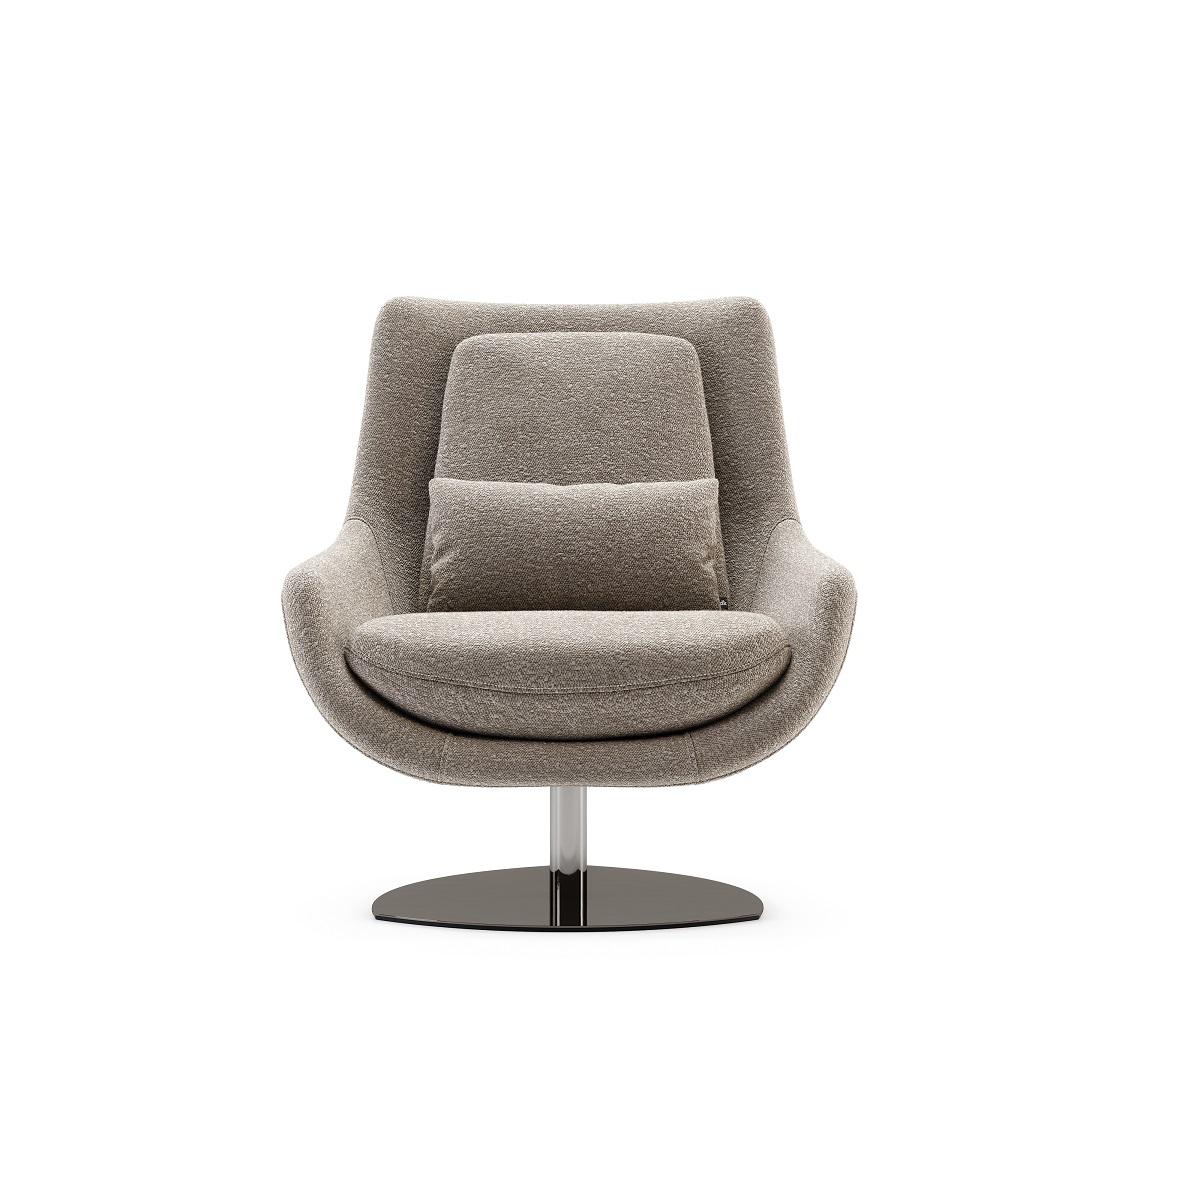 Swivel Armchair W Ottoman in Leather & Polished Stainless Steel 10